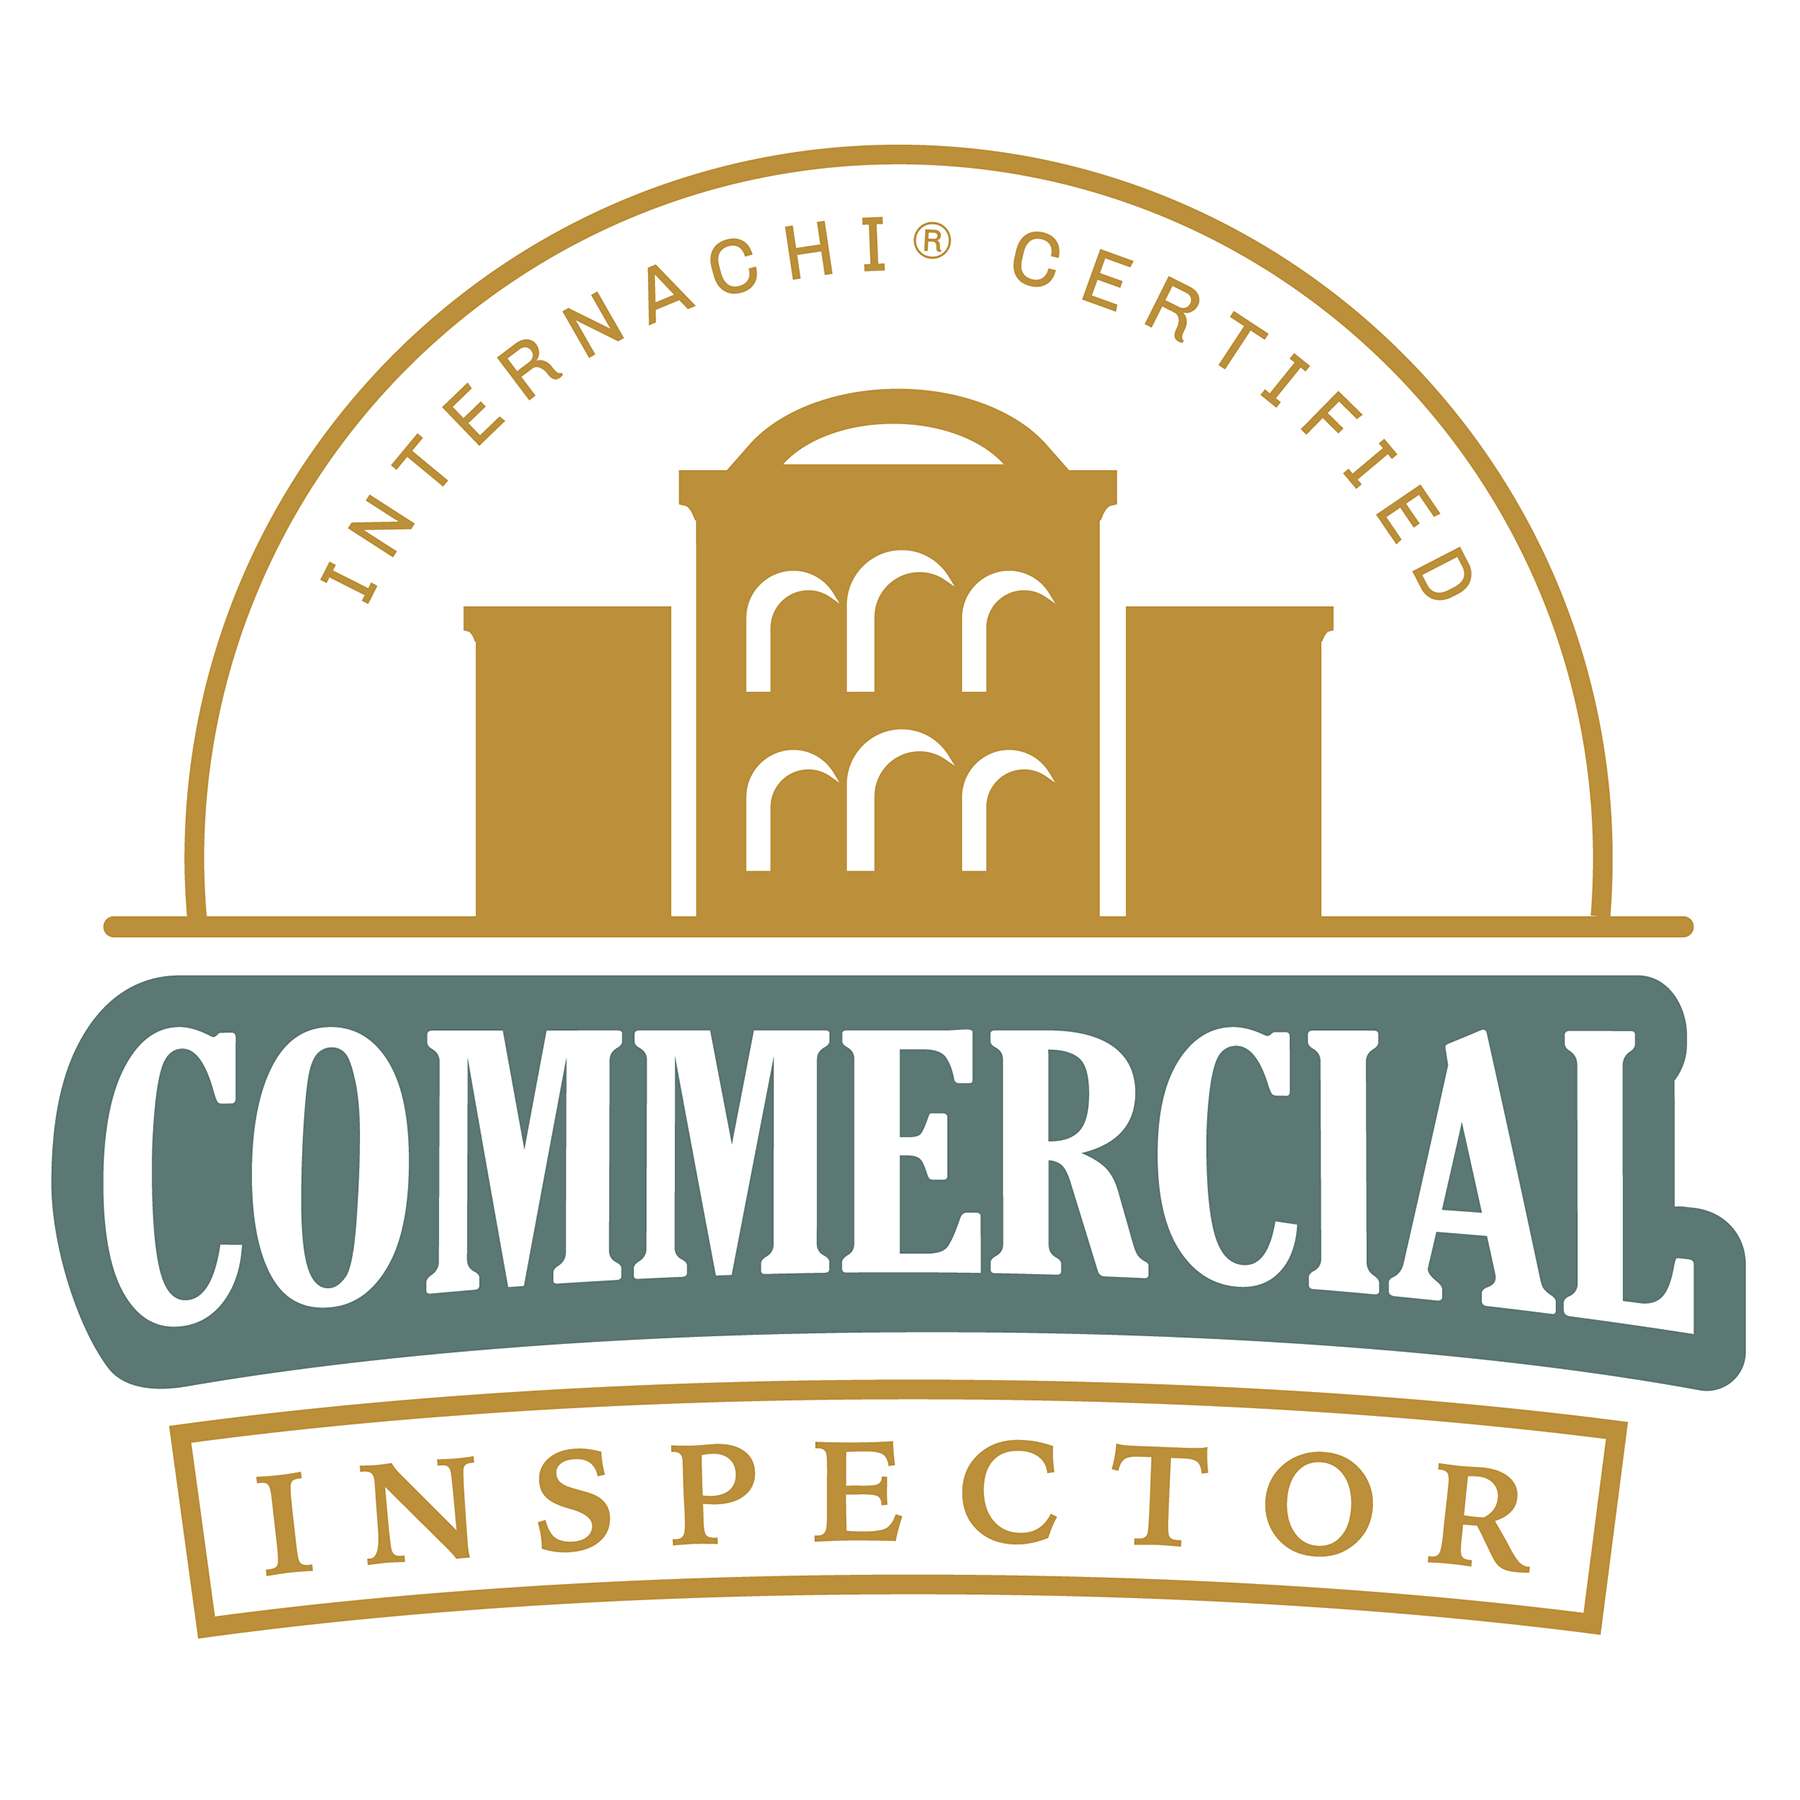 Guardian Home Inspection | Lakeland, FL Home Inspections